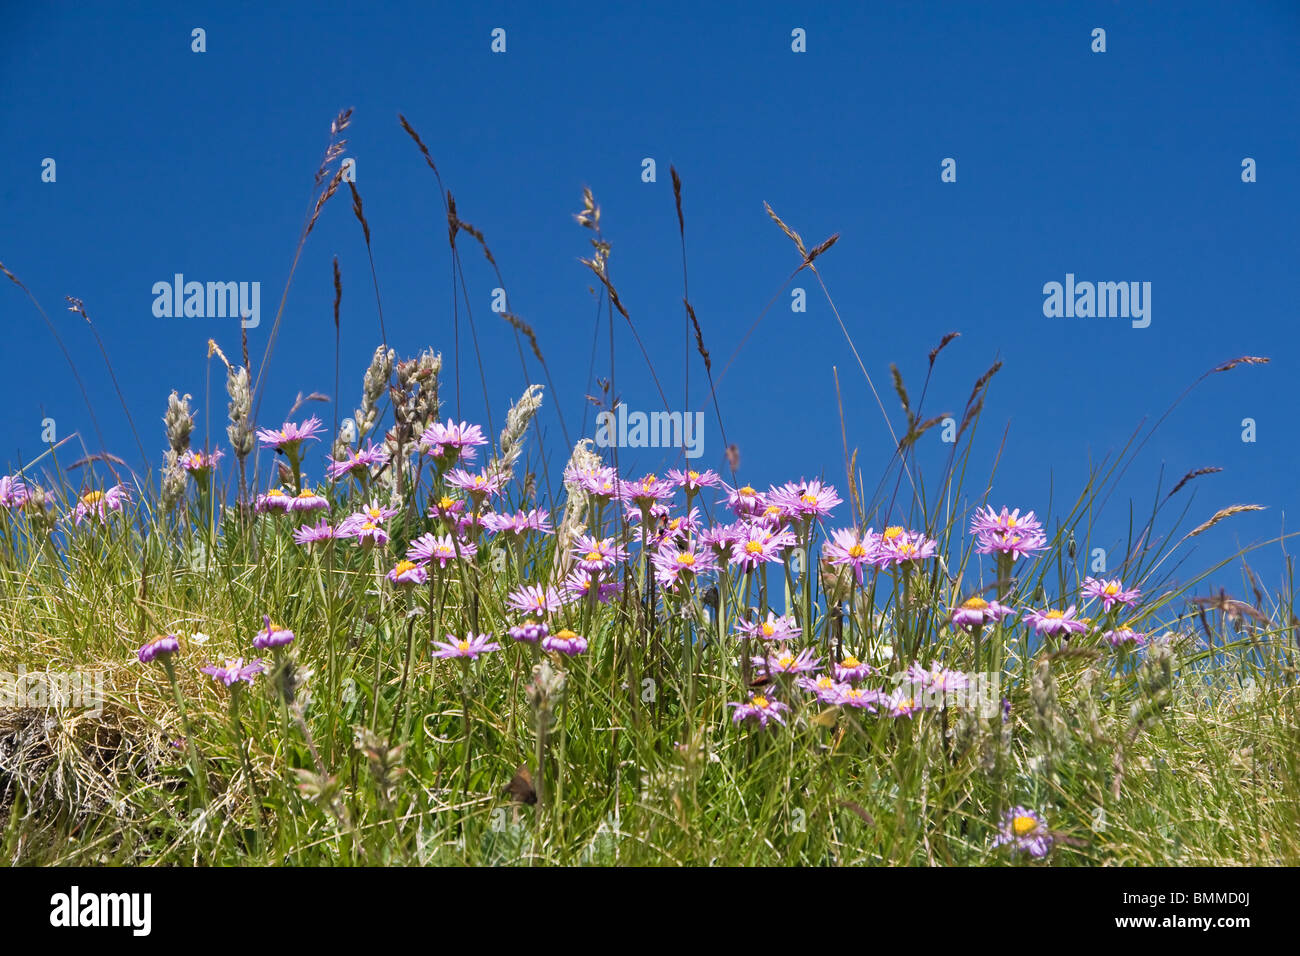 meadow on summer with Aster Alpinus flowers under a bright blue sky Stock Photo